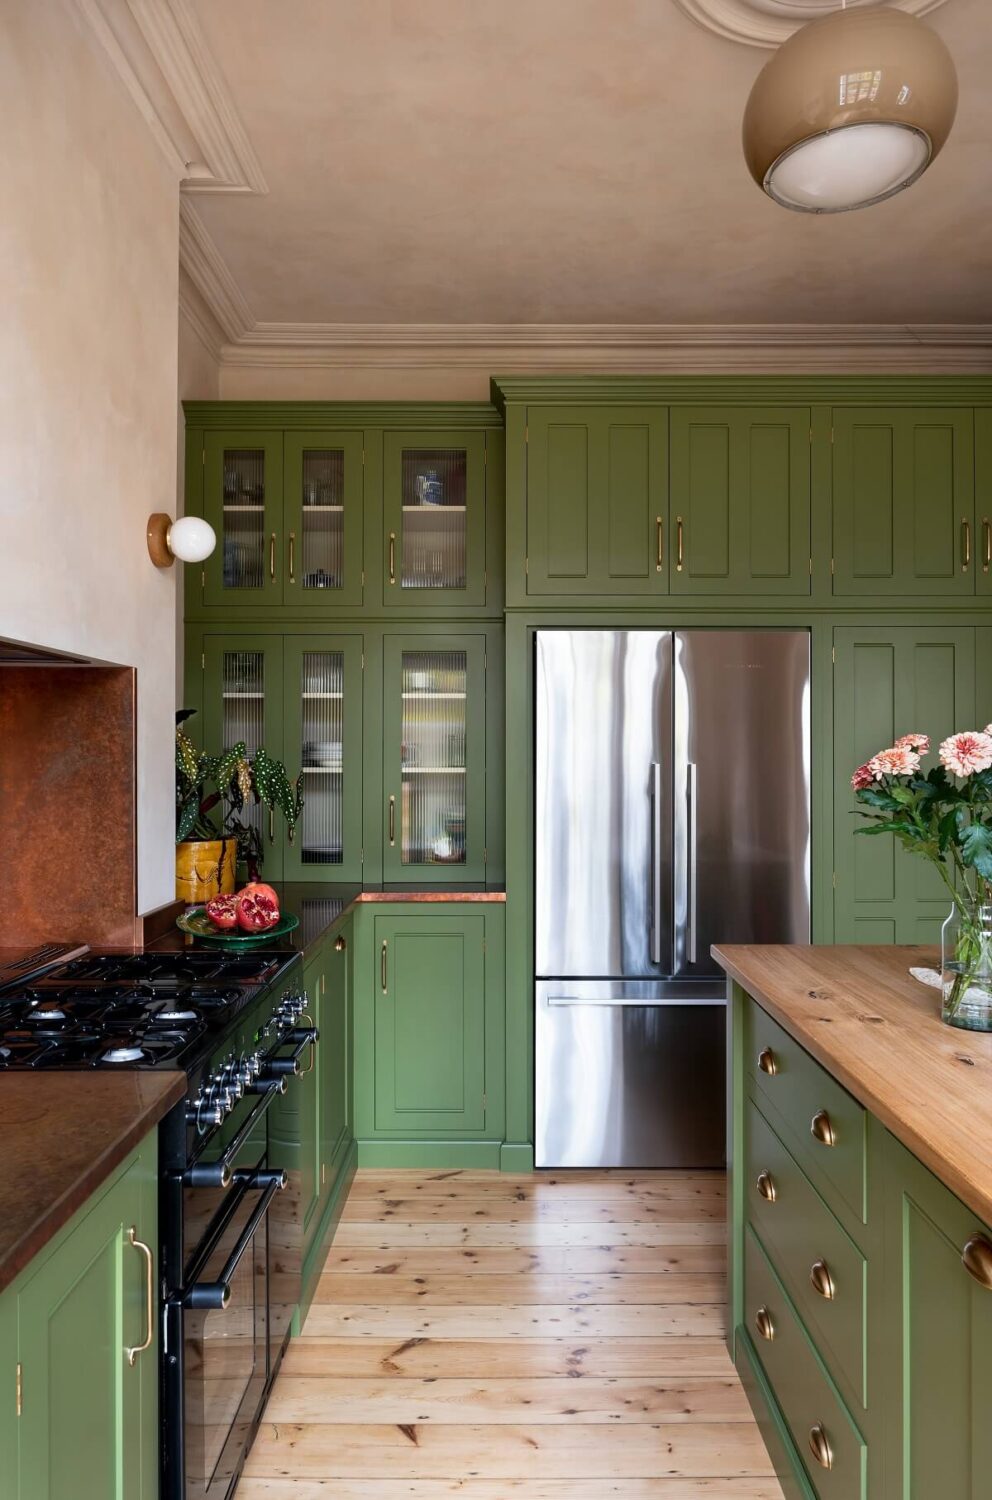 floor-to-ceiling-cabinets-classic-english-cupboards-devol-nordroom